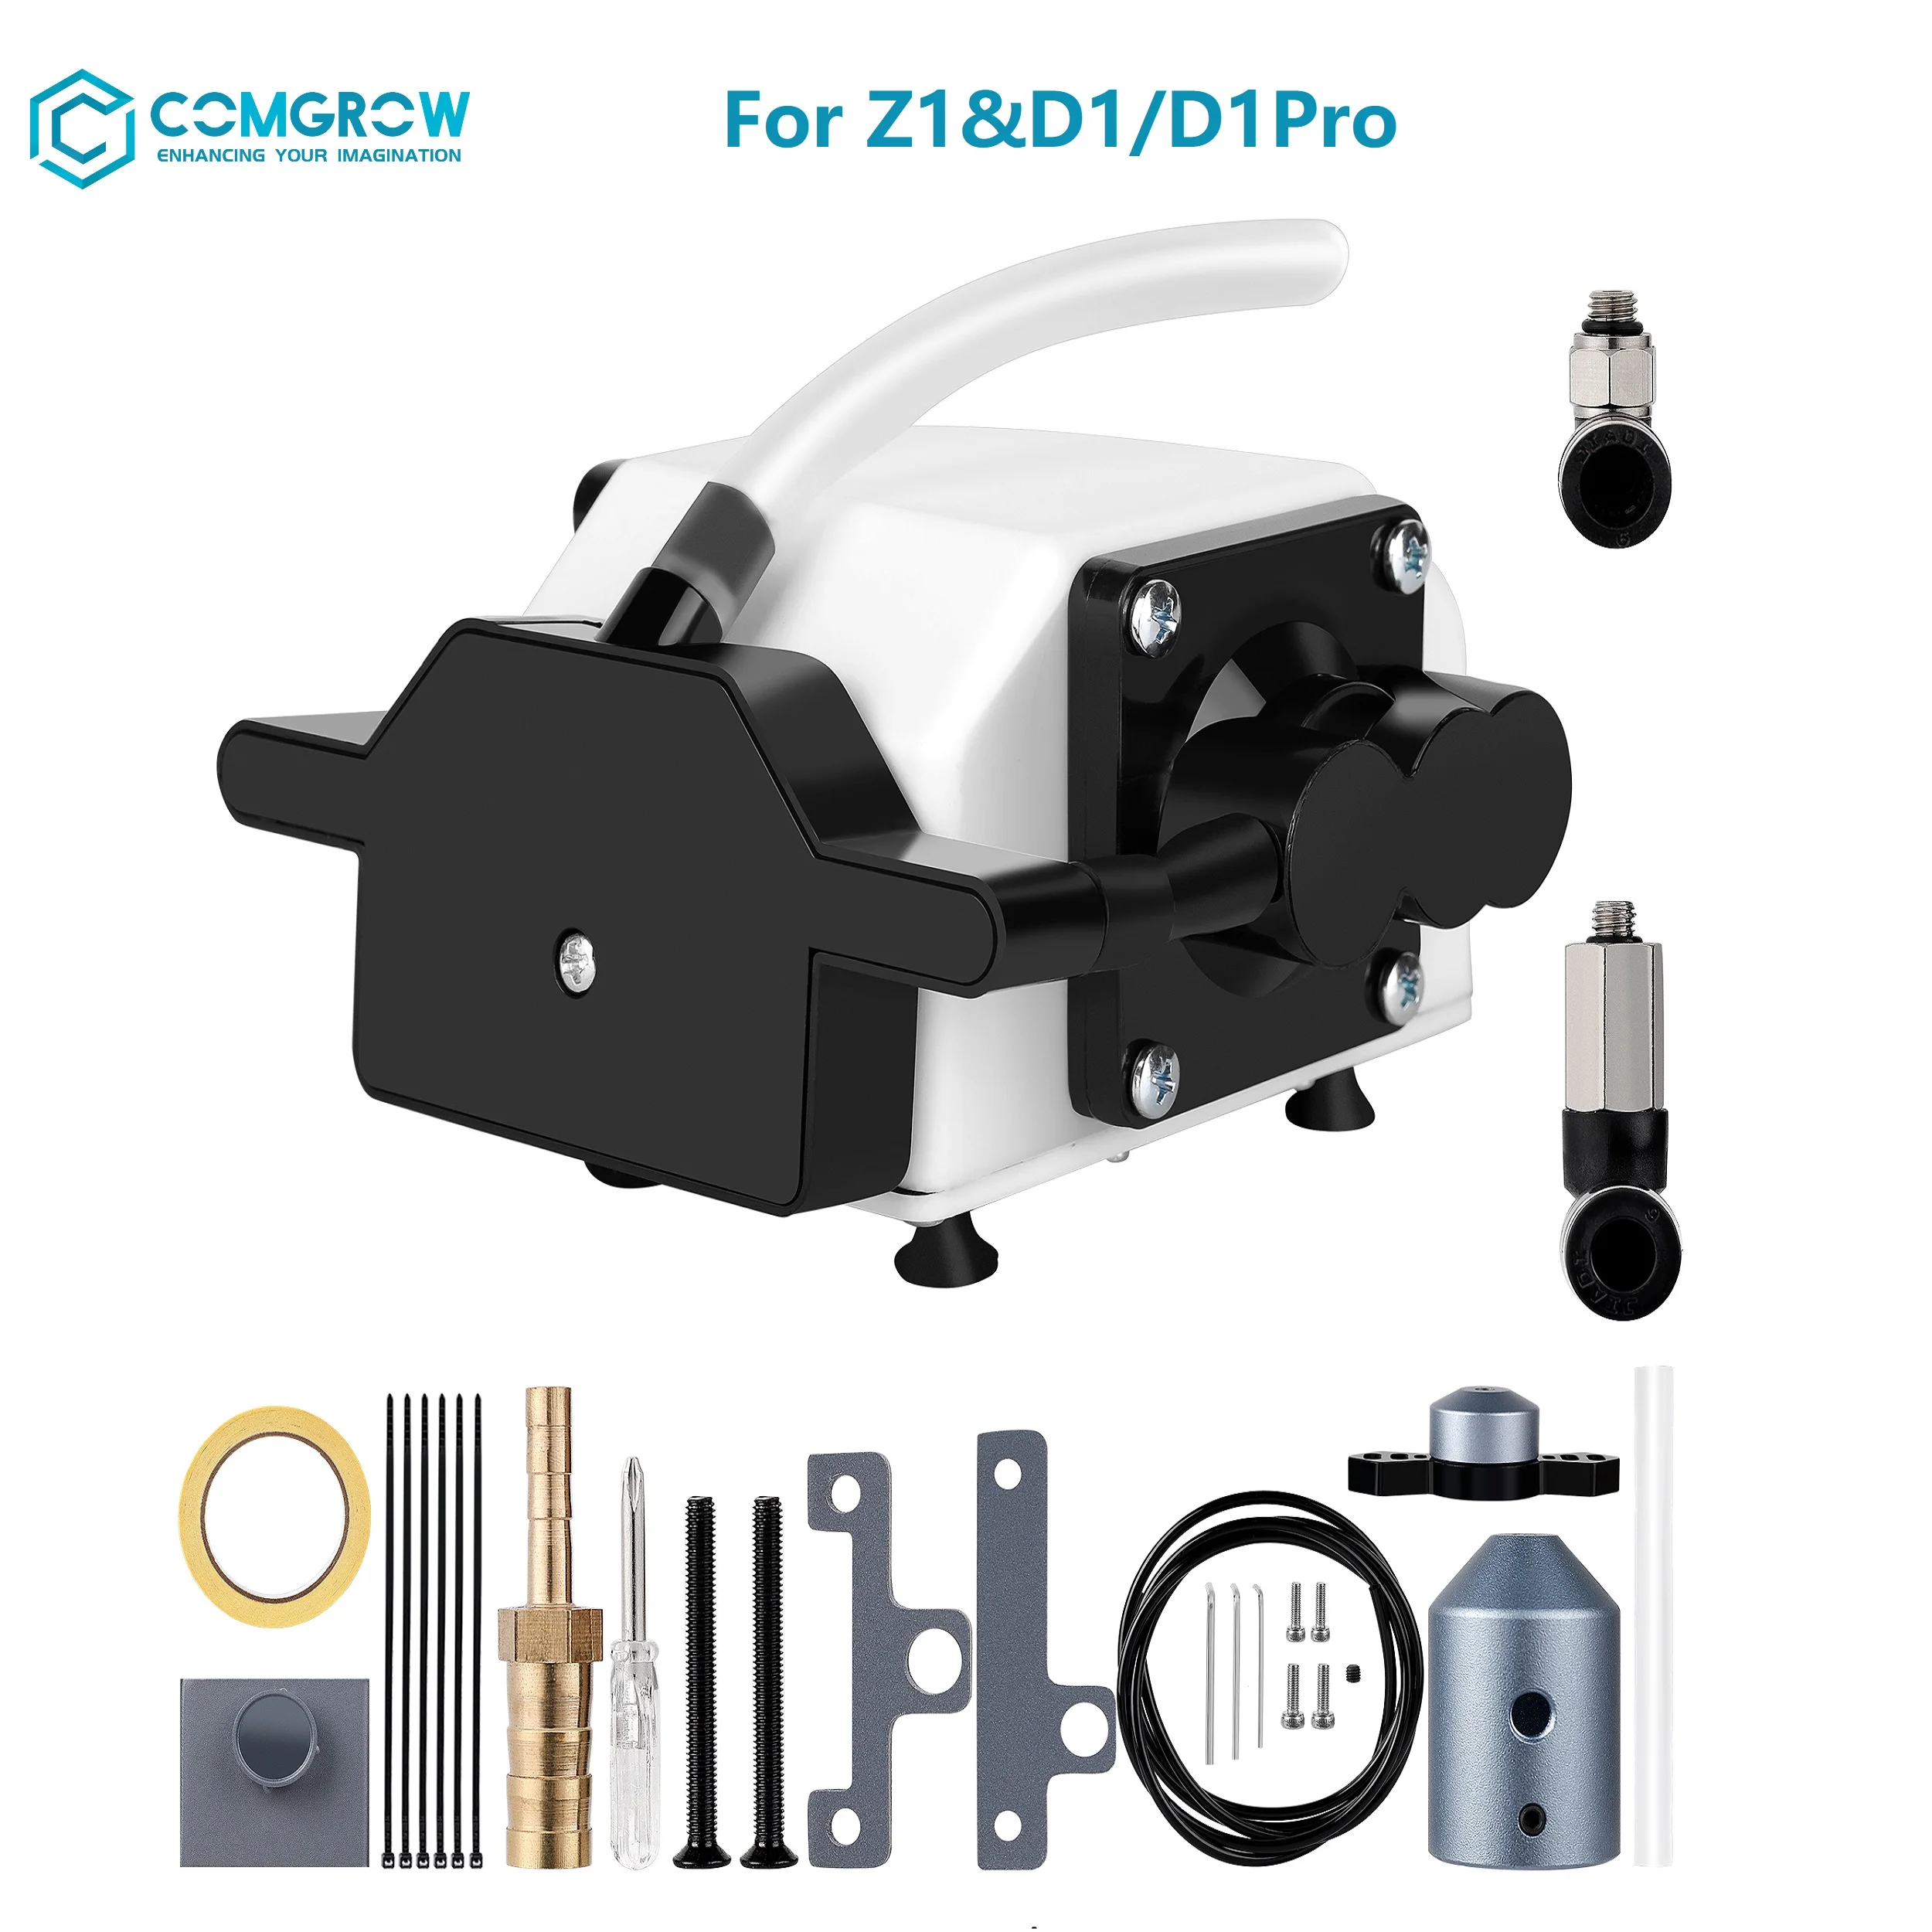 COMGROW Air Assist Nozzle Kit High Speed Air Assist Pump For D1/D1 Pro&COMGO Z1 Laser Engraver MDF Engraving Wood Cutting Tool